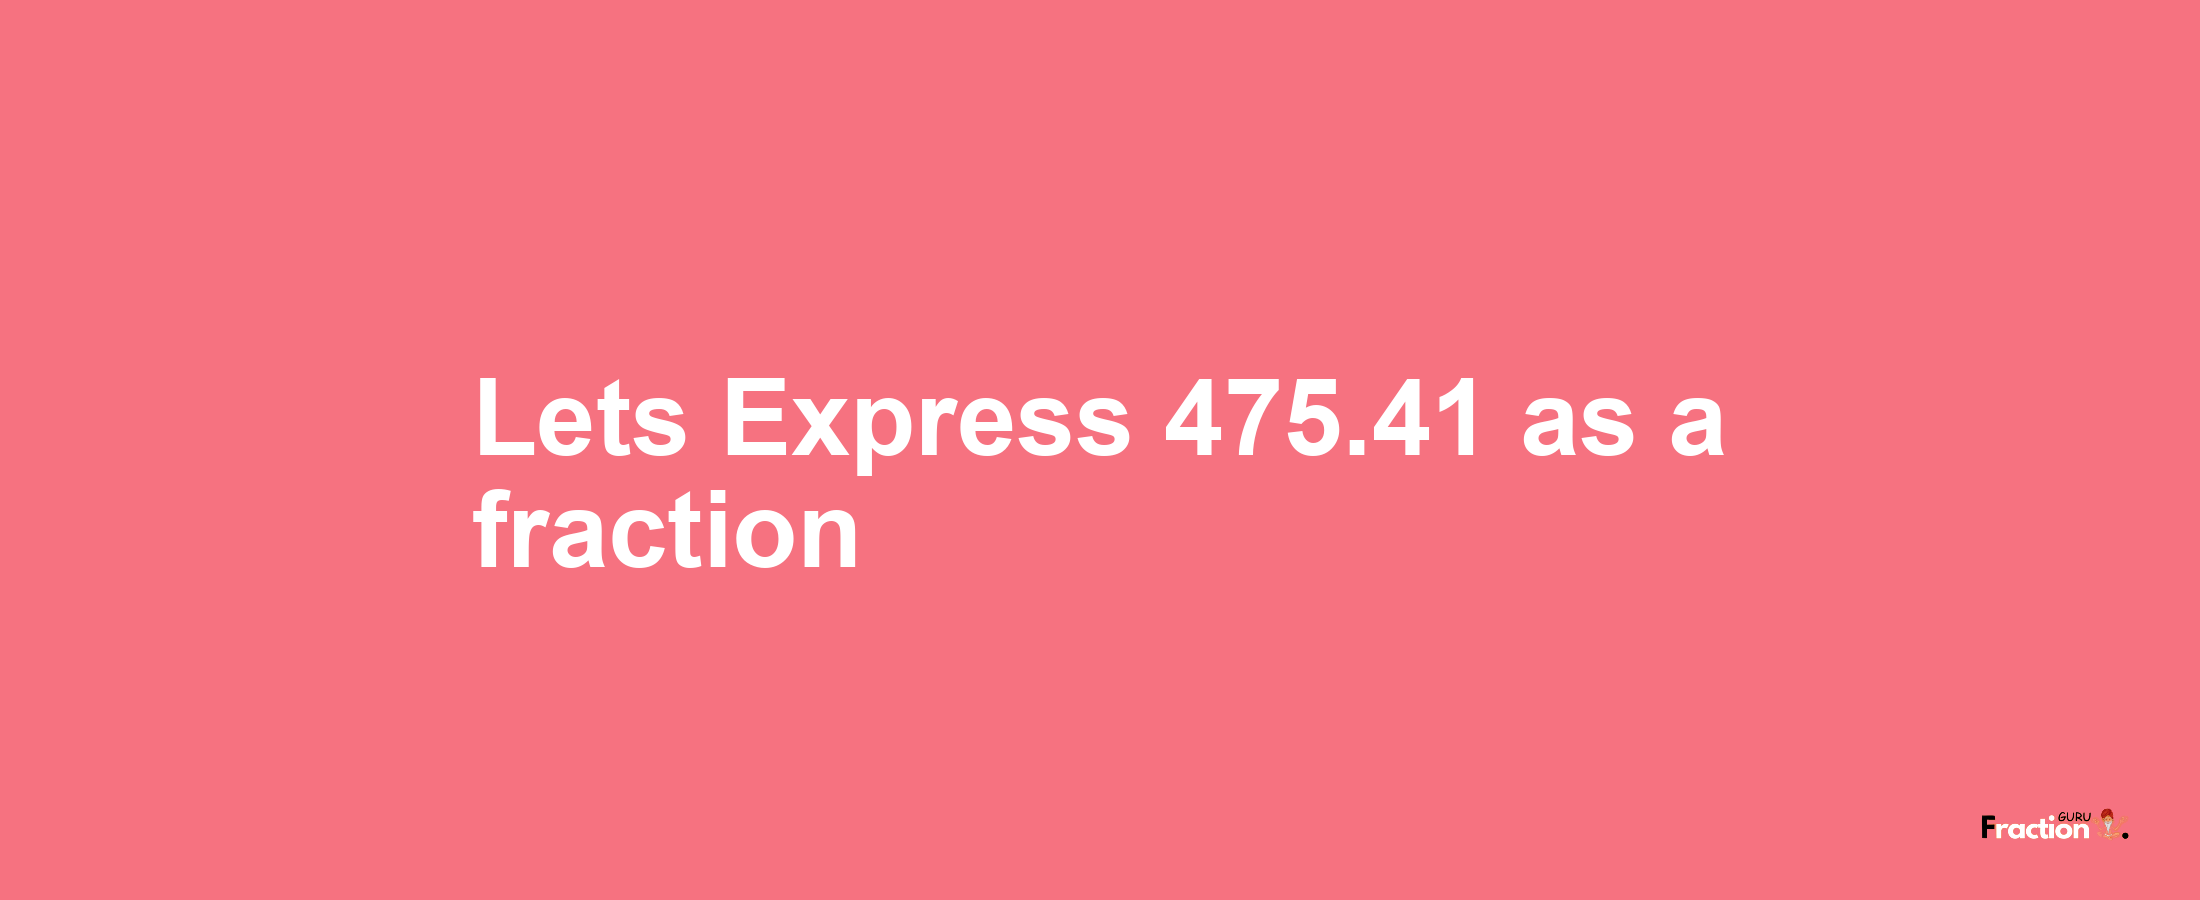 Lets Express 475.41 as afraction